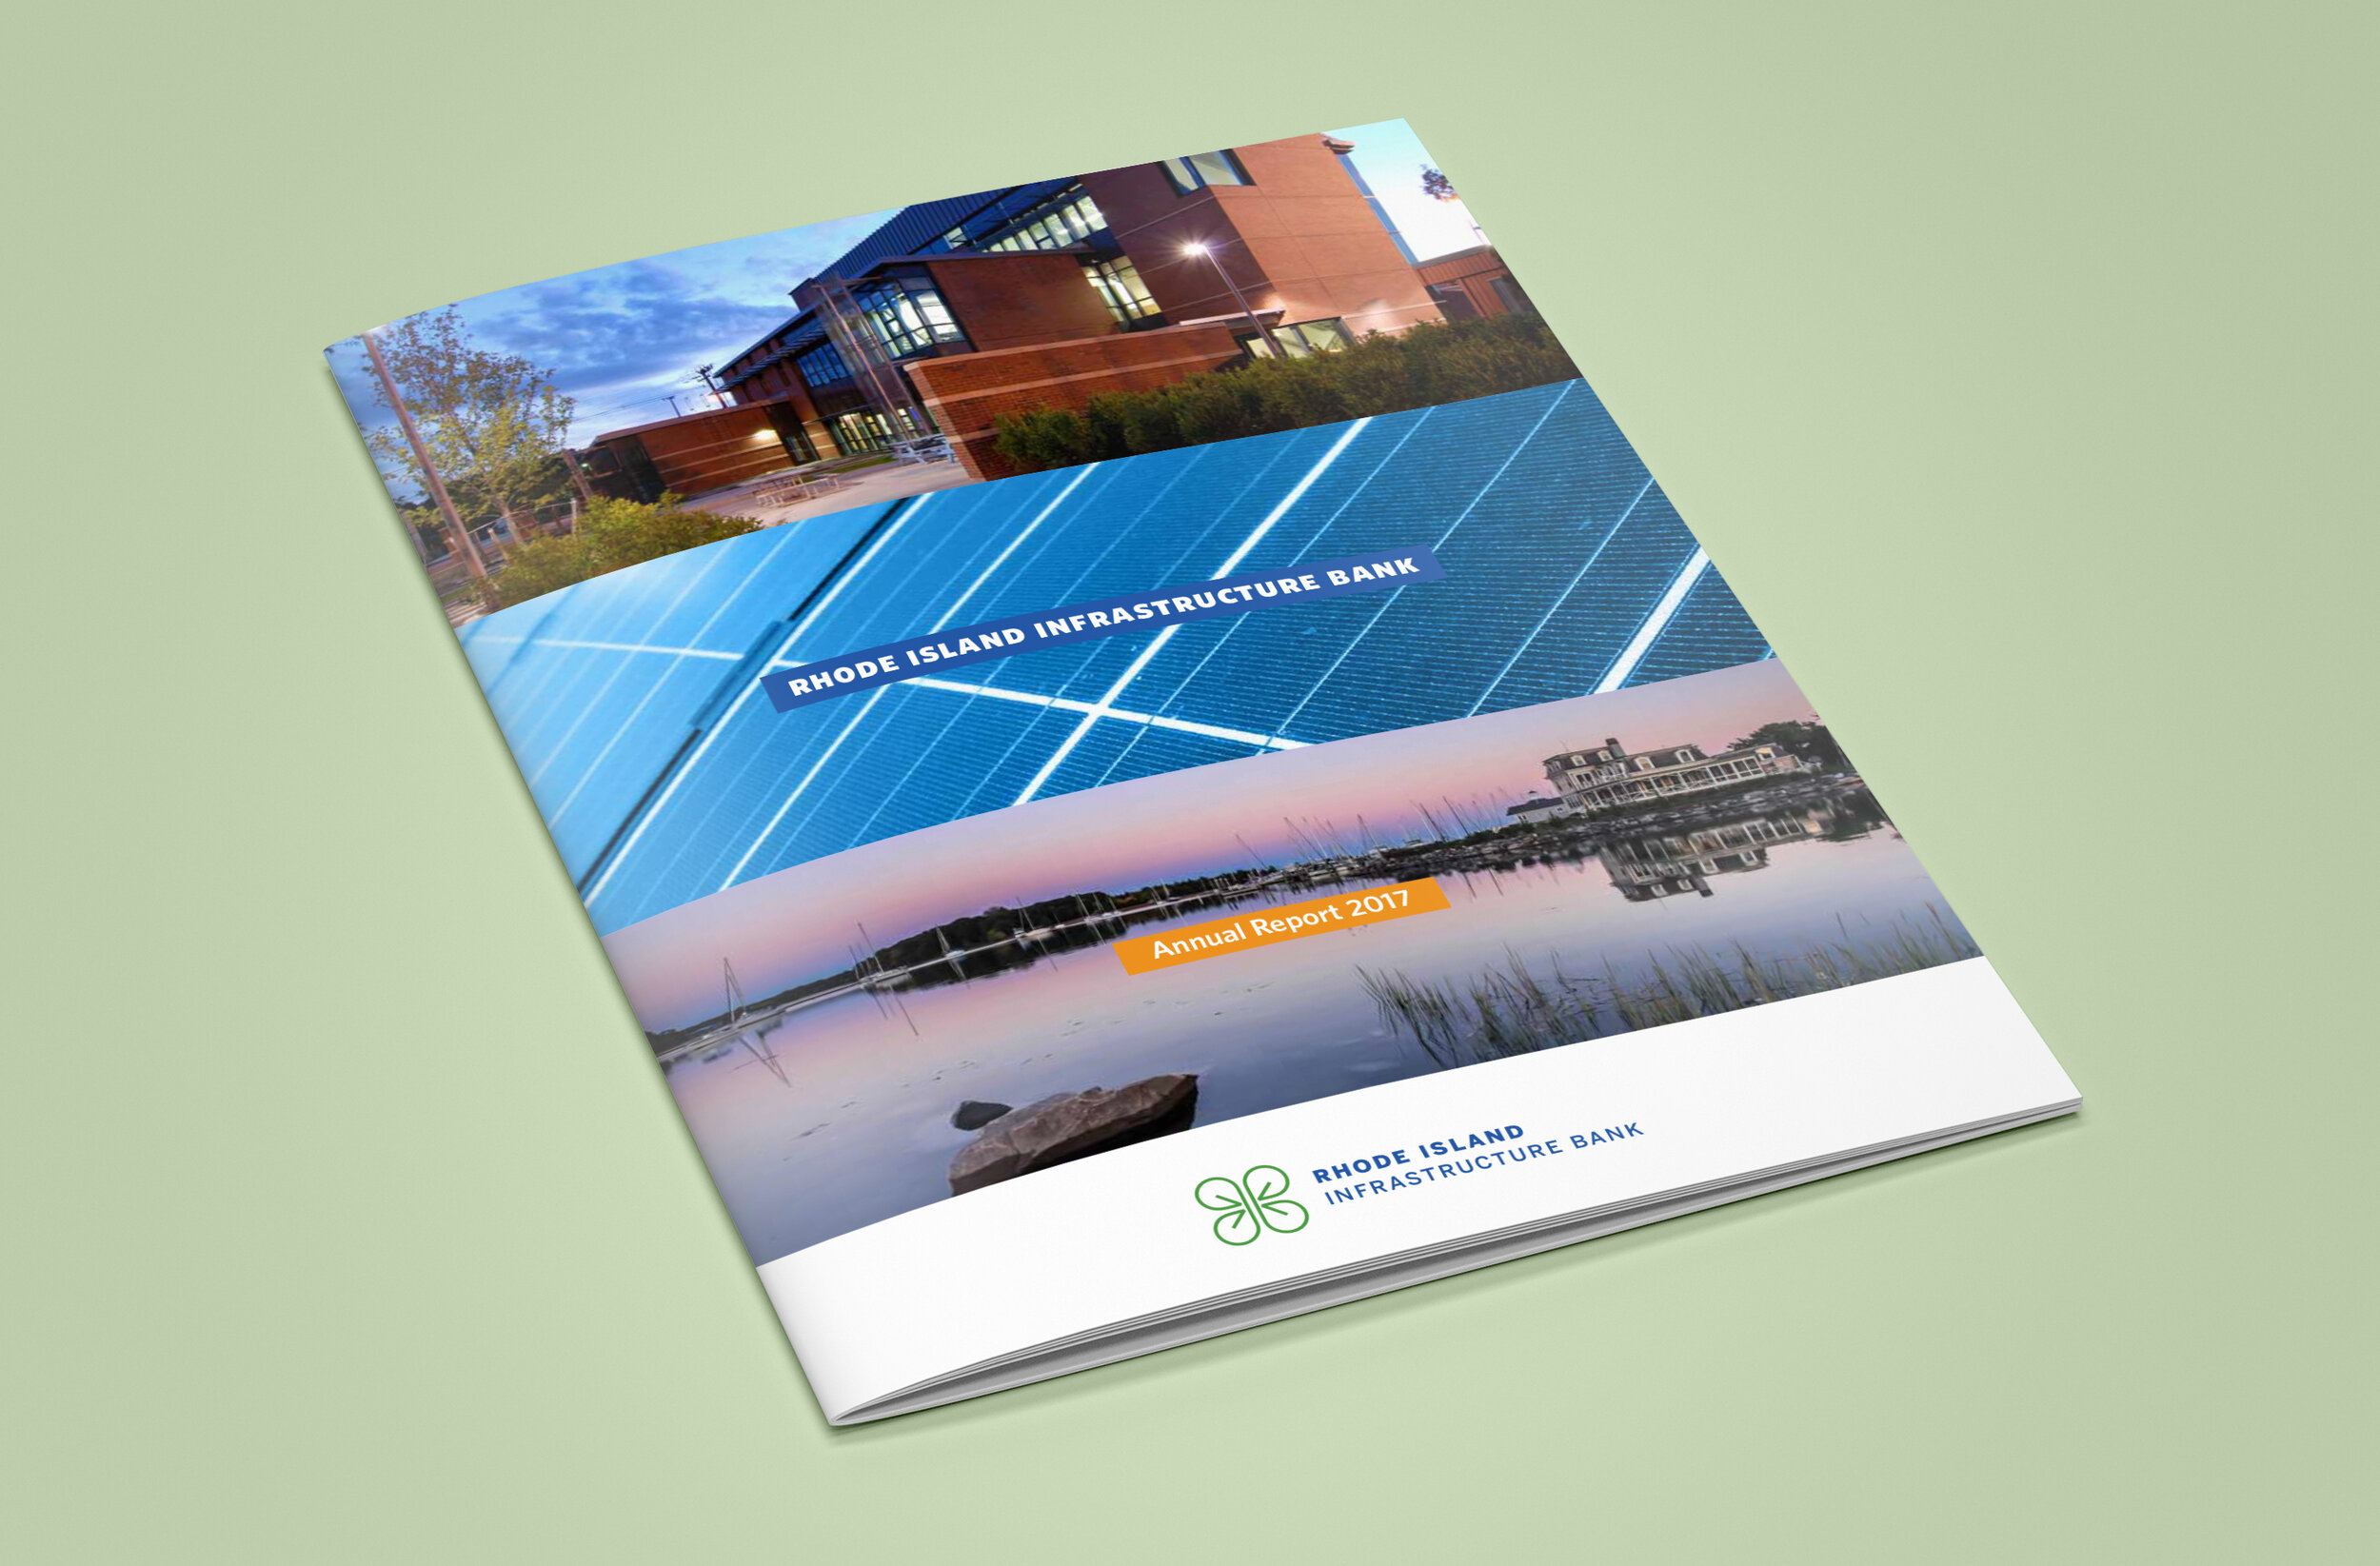 ri-infrastucture-bank-annual-report-17-cover.jpg